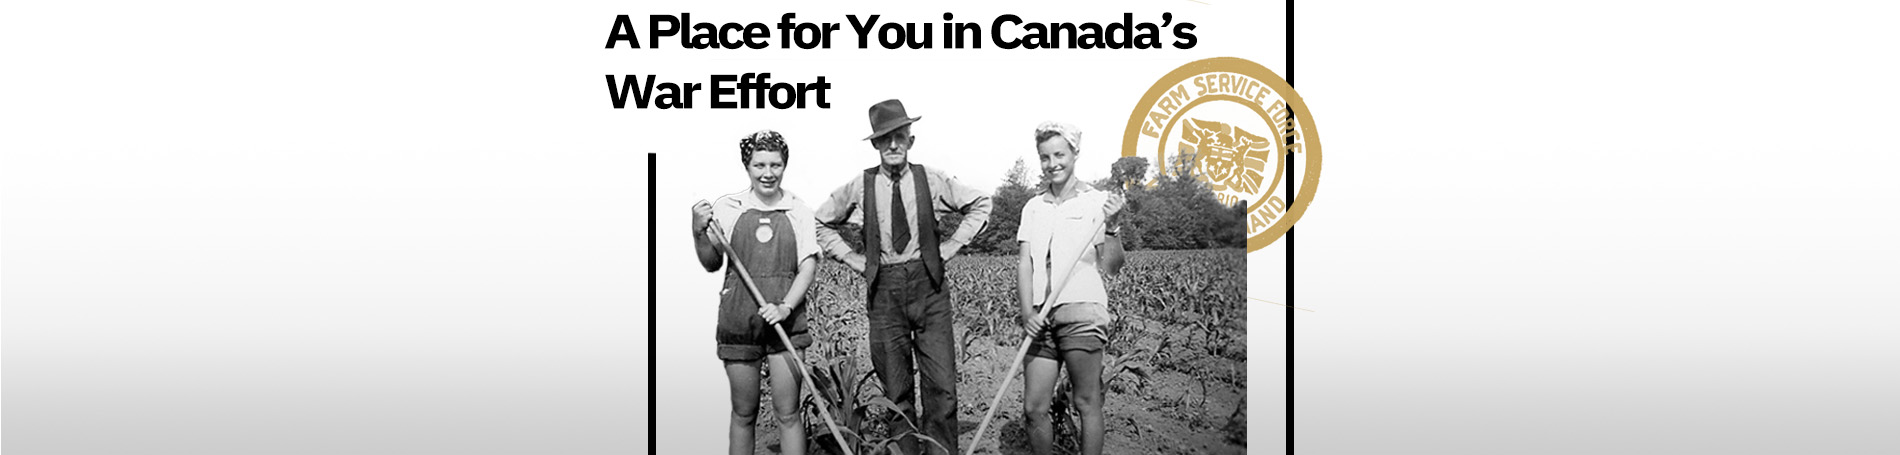 Two Farmerettes stand beside a farmer. Text reads, "A Place for You in Canada's War Effort".